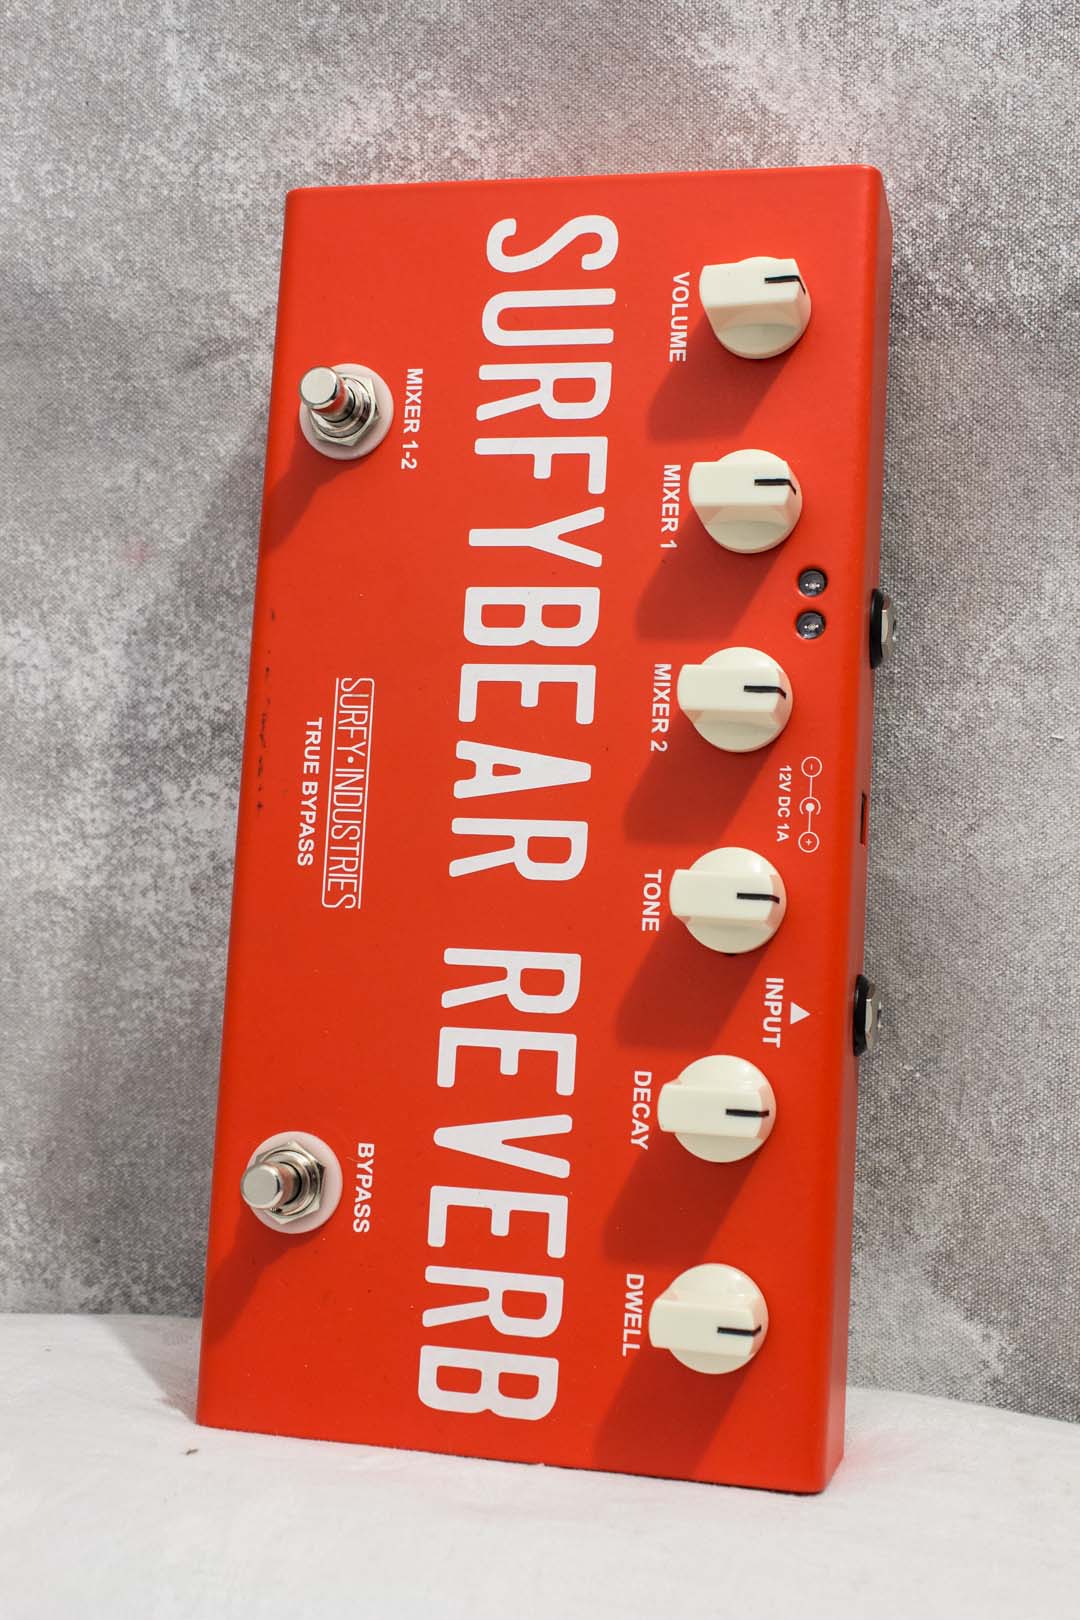 Surfy Industries Surfybear Compact Reverb Fiesta Red Pedal